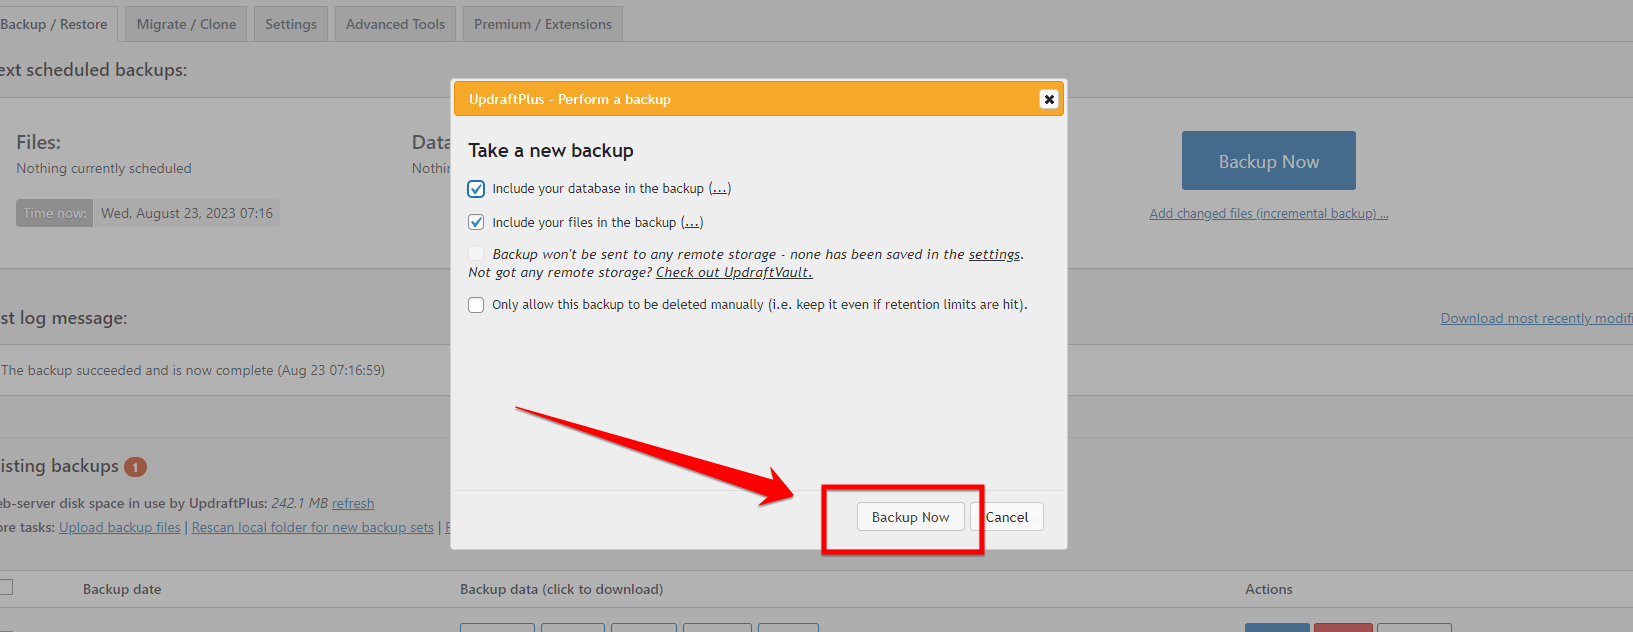 Push The Backup Now Button After Checking The Boxes